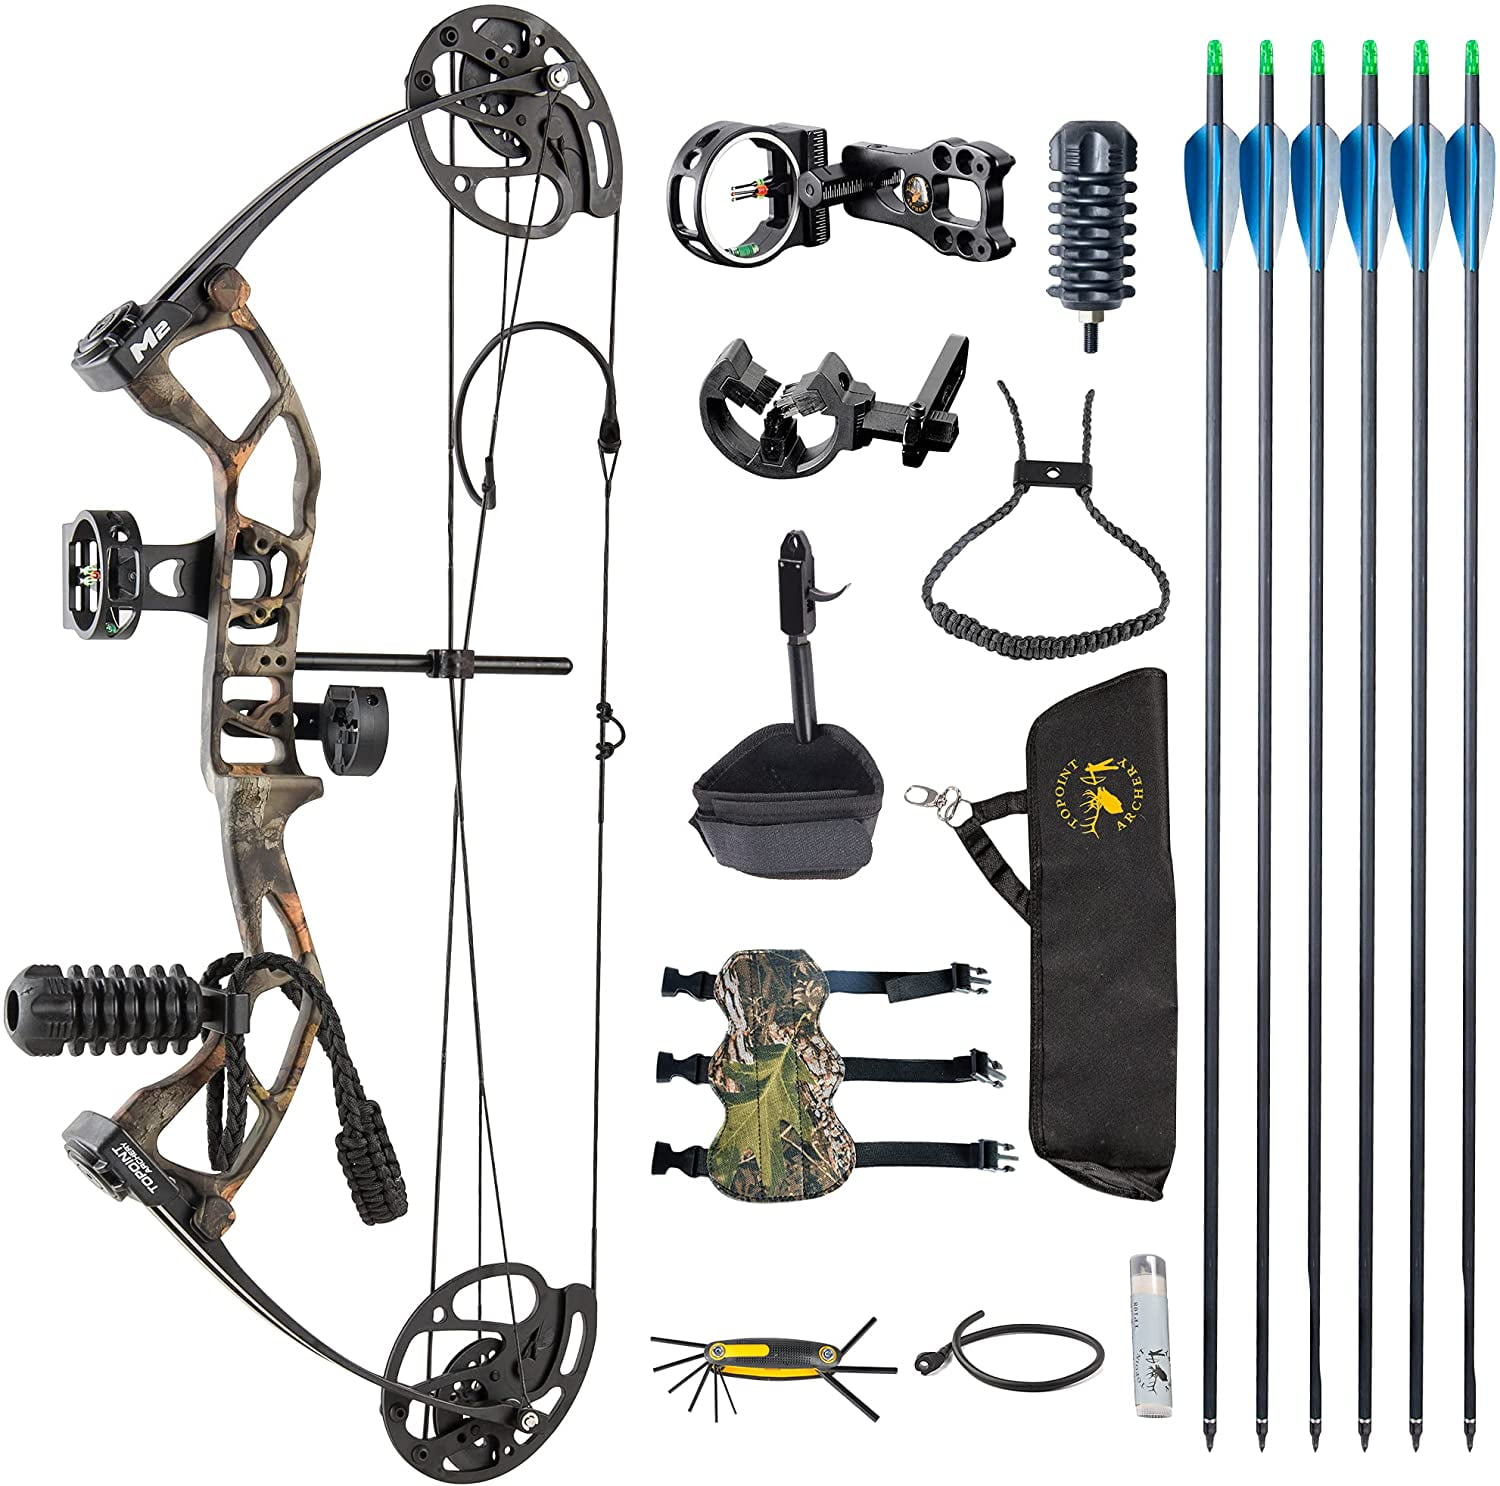 Archery Compound Bow Set for Kids and Juniors,Adjustable 17”-27” Draw Length,10-30 lbs Draw Weight,Complete Package,Right Handed Only